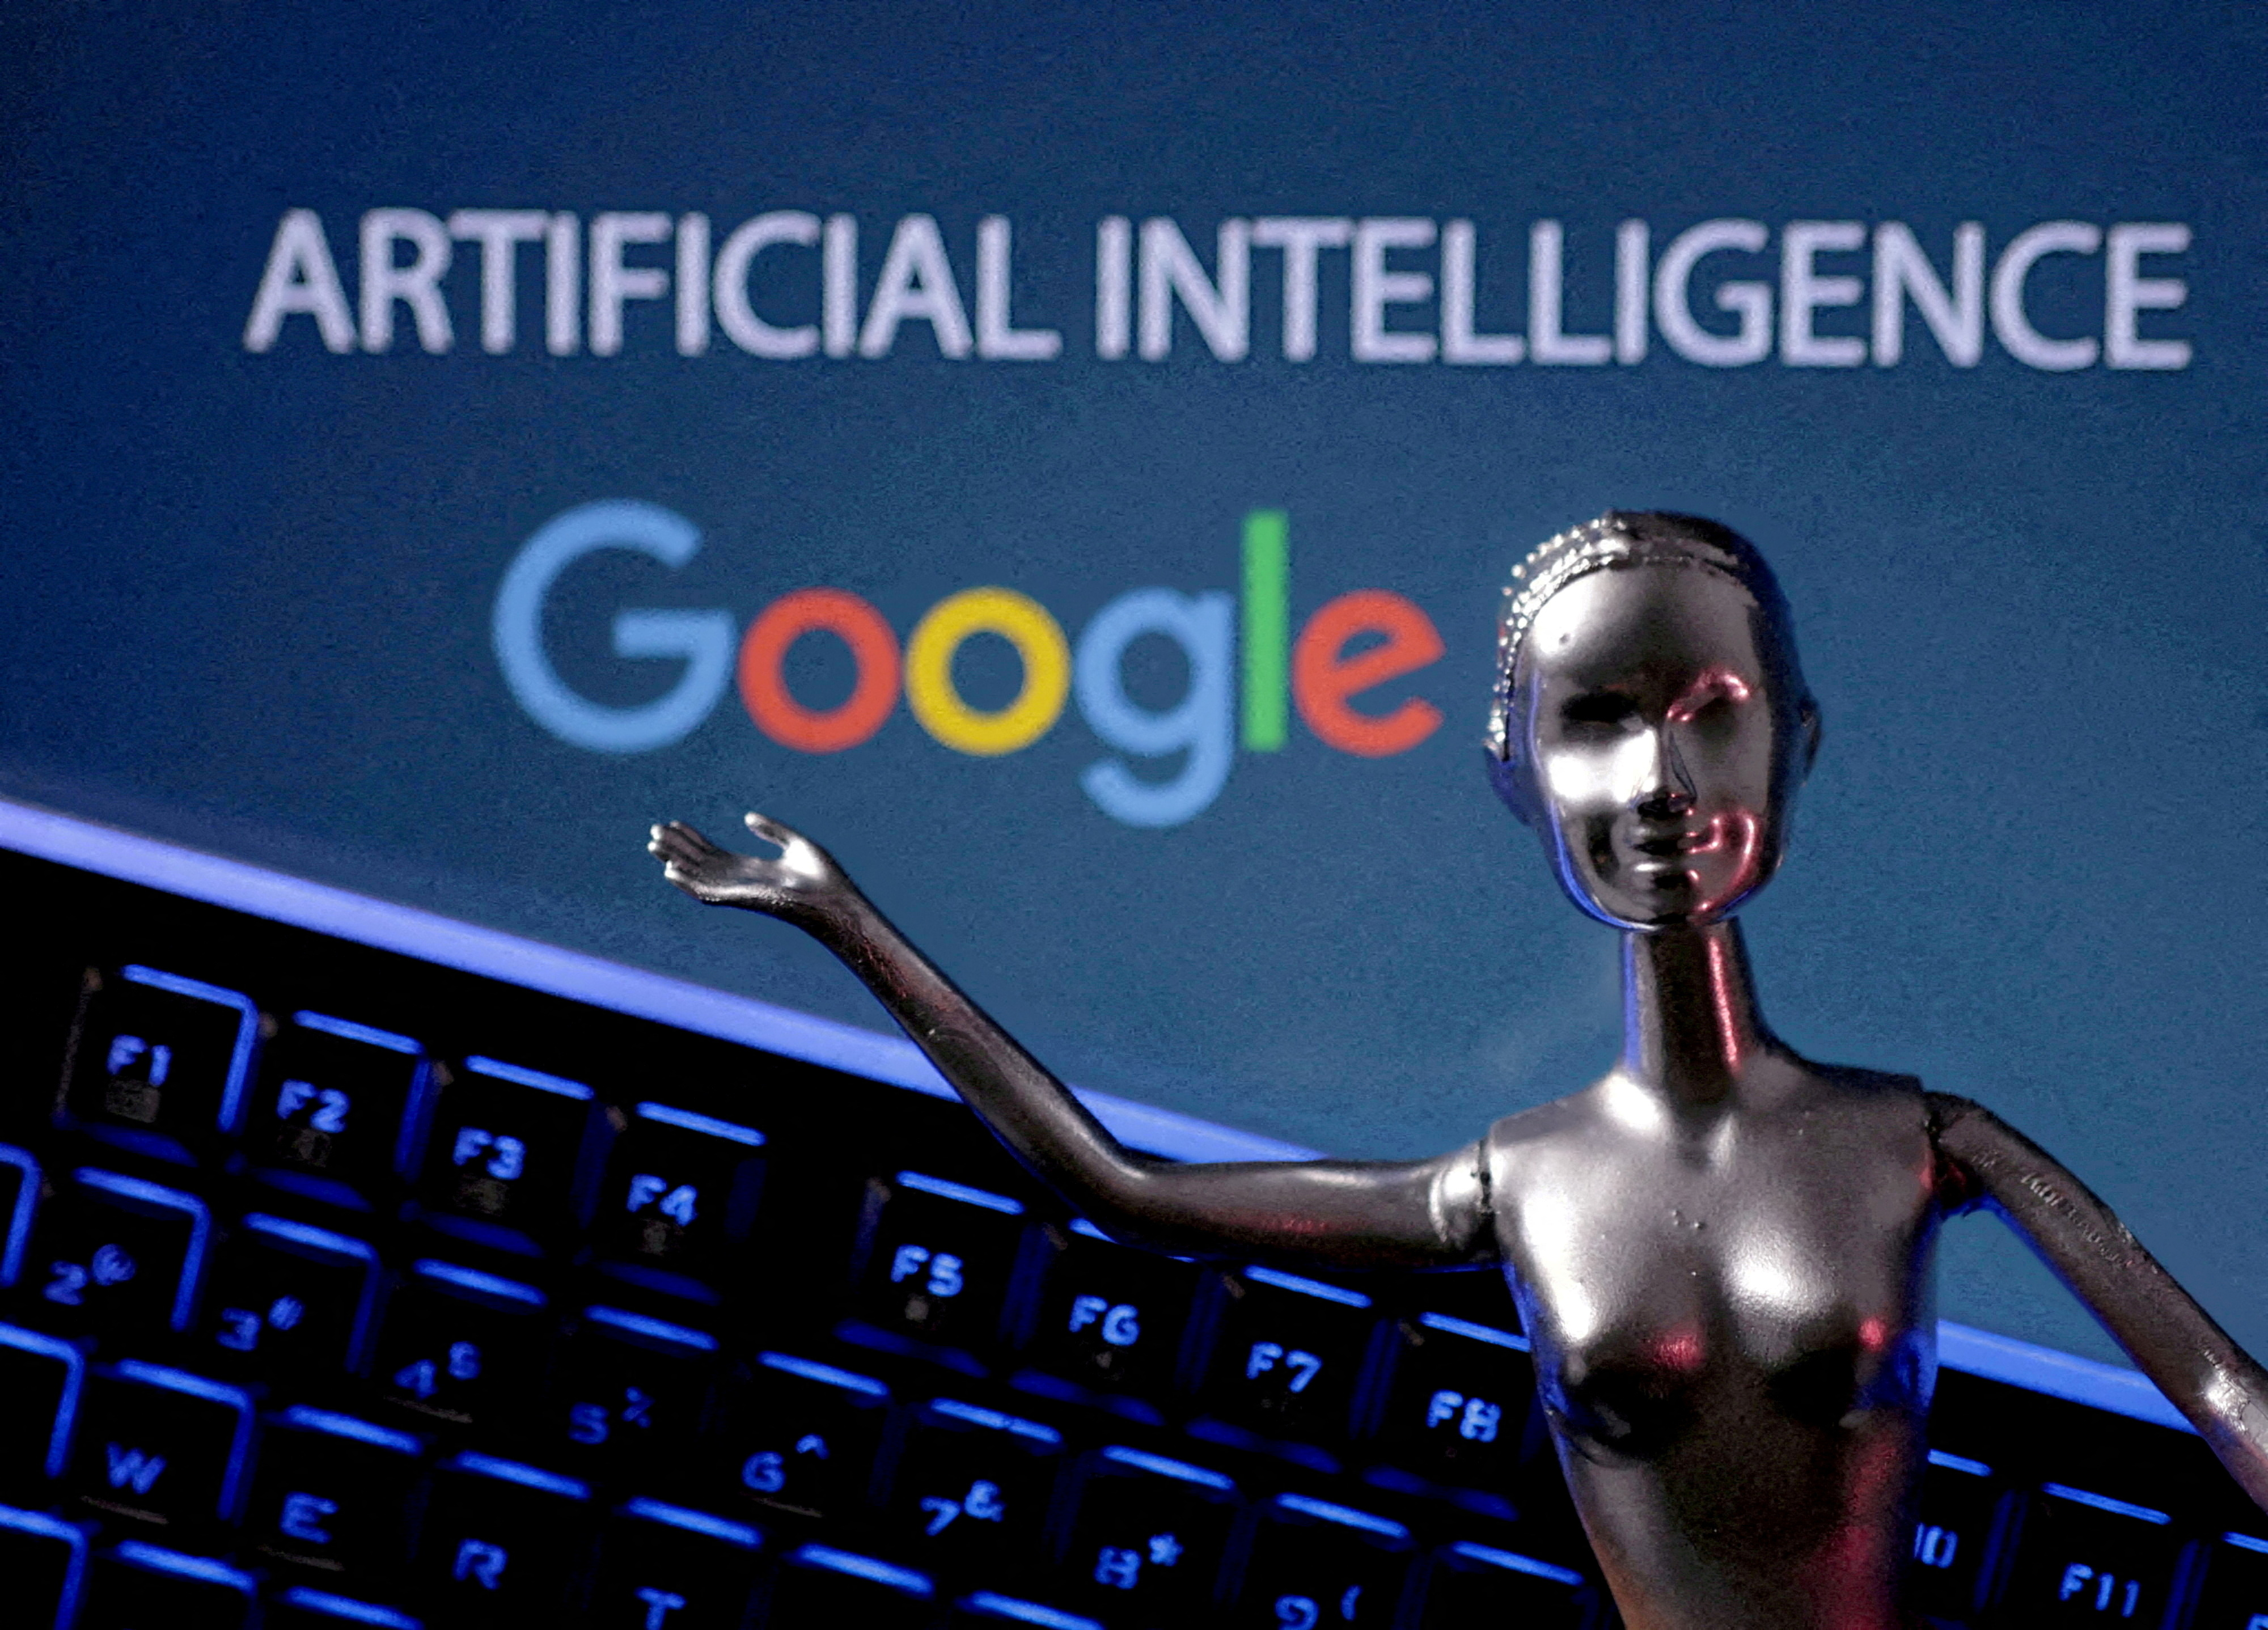 Illustration shows Google logo and AI Artificial Intelligence words